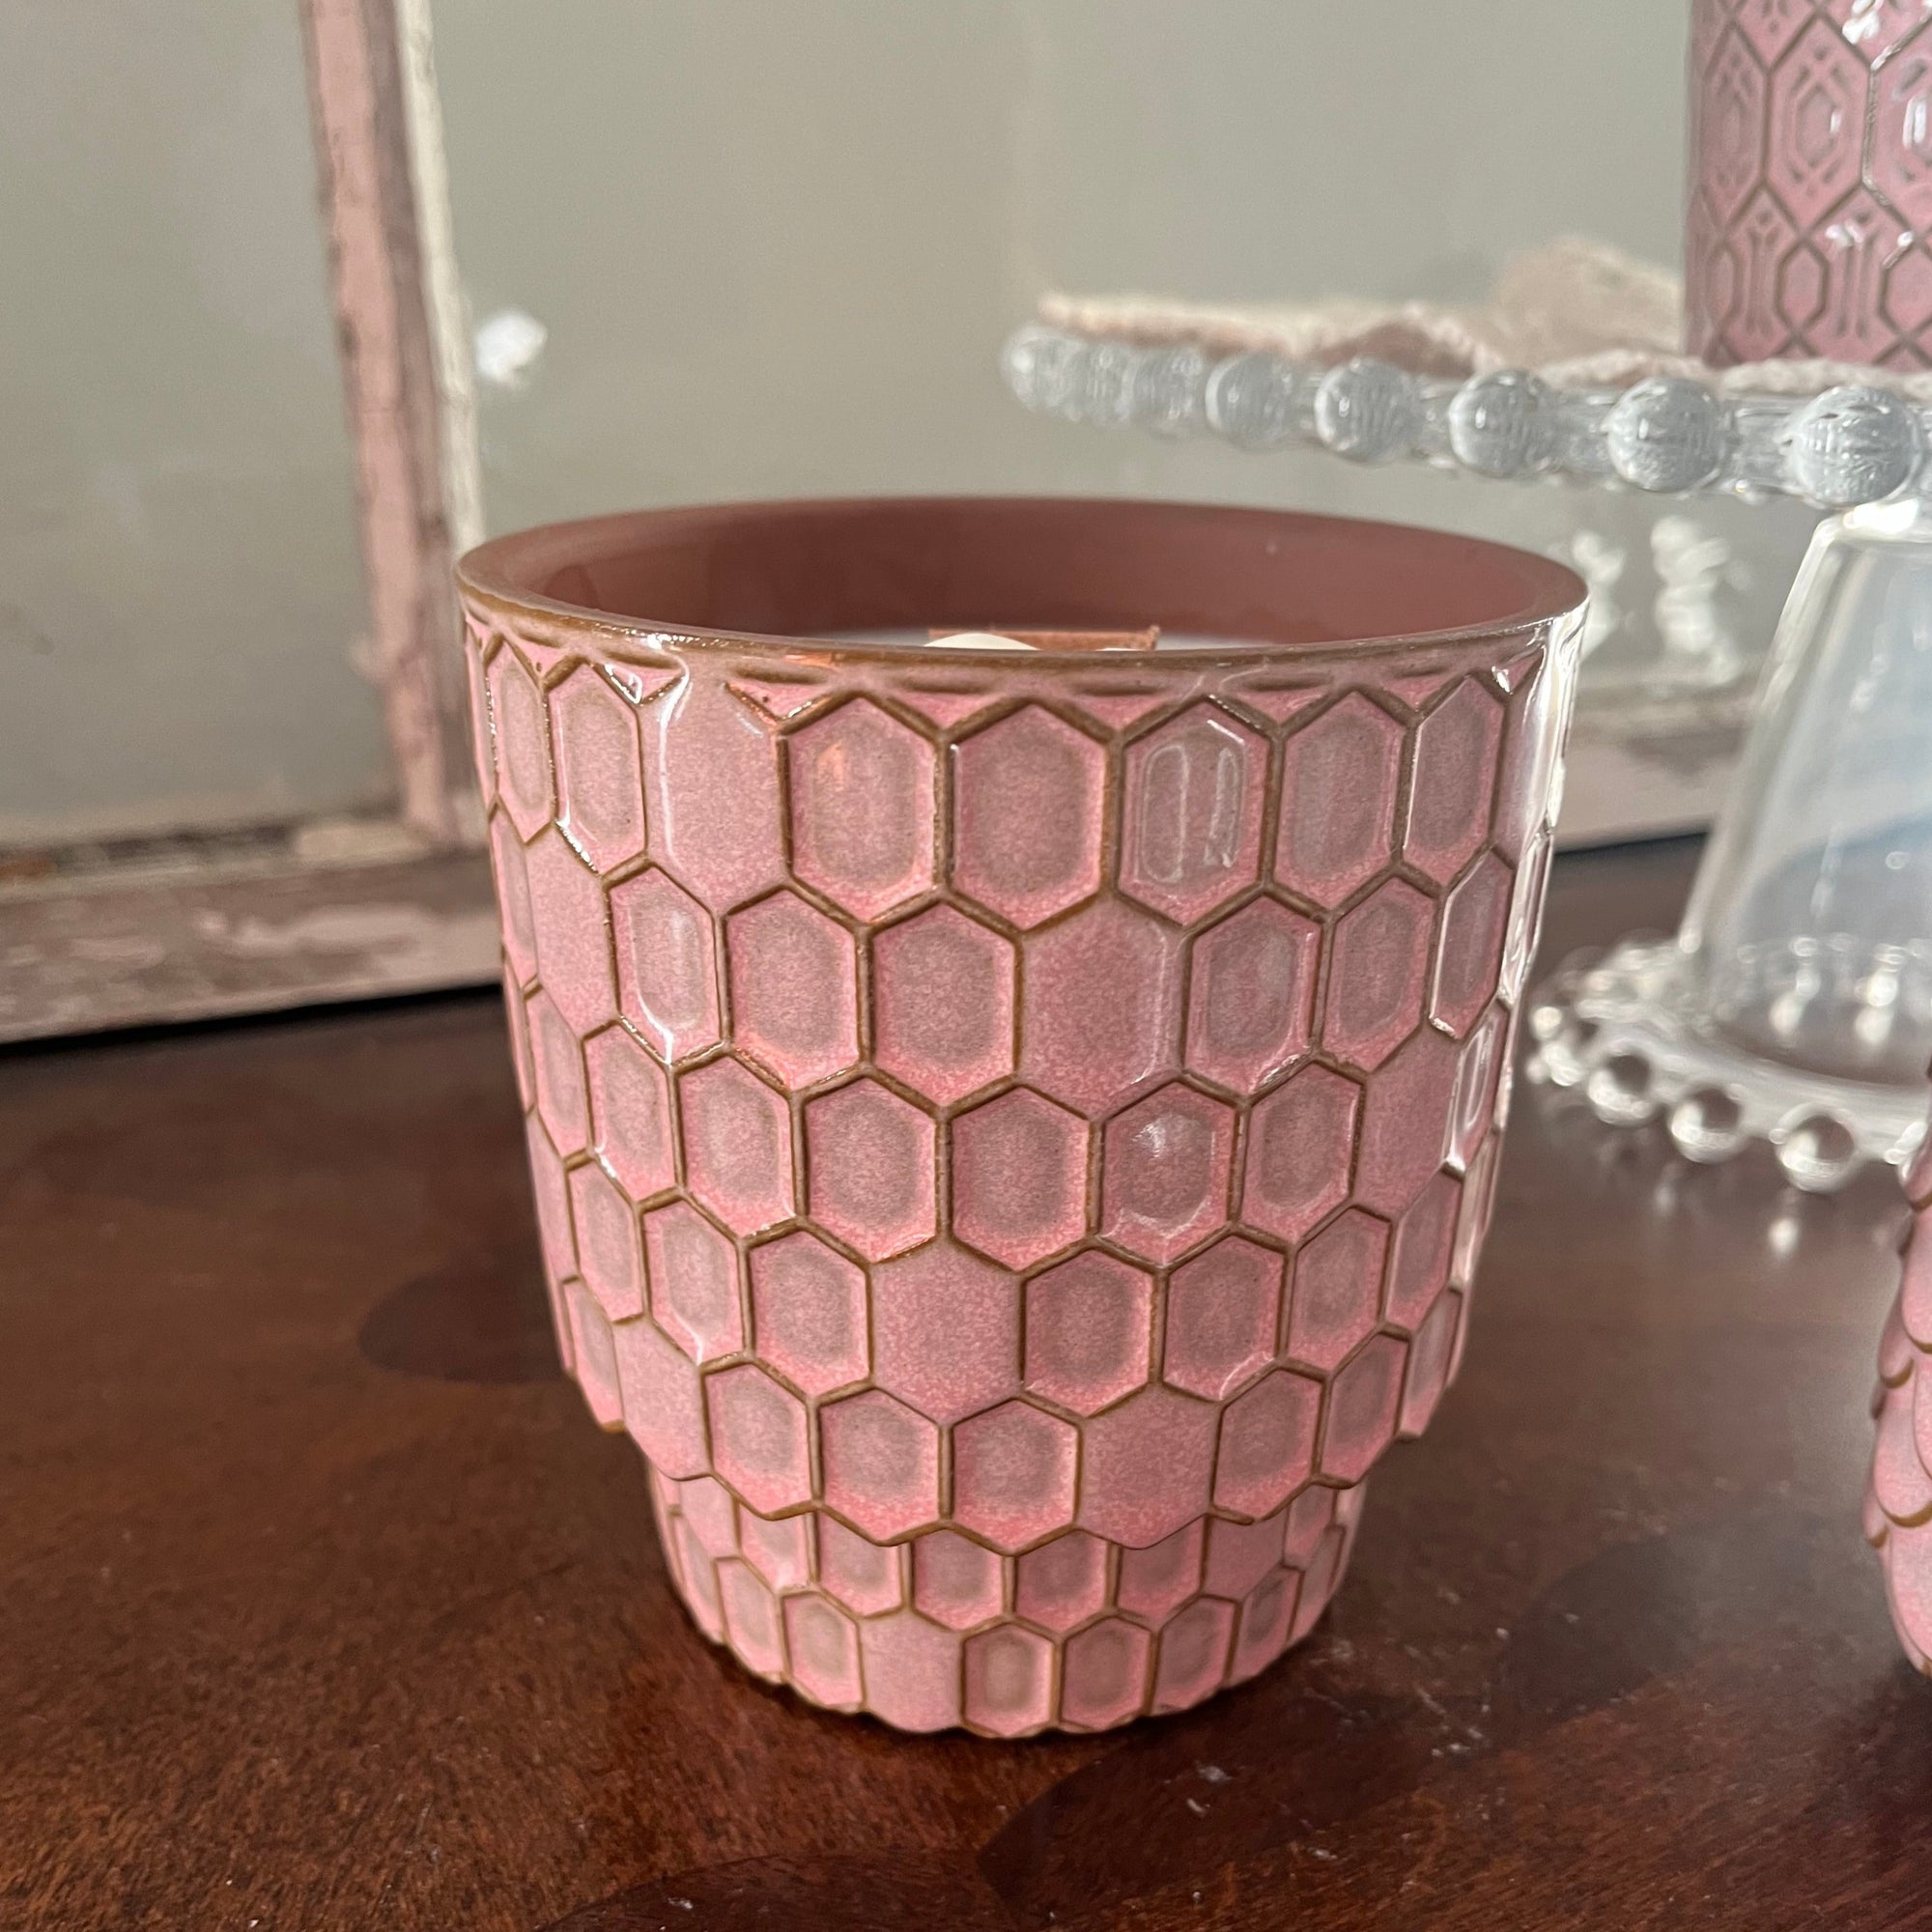 Summertime Wood Wick Candle - Pink Base, Honeycomb Design